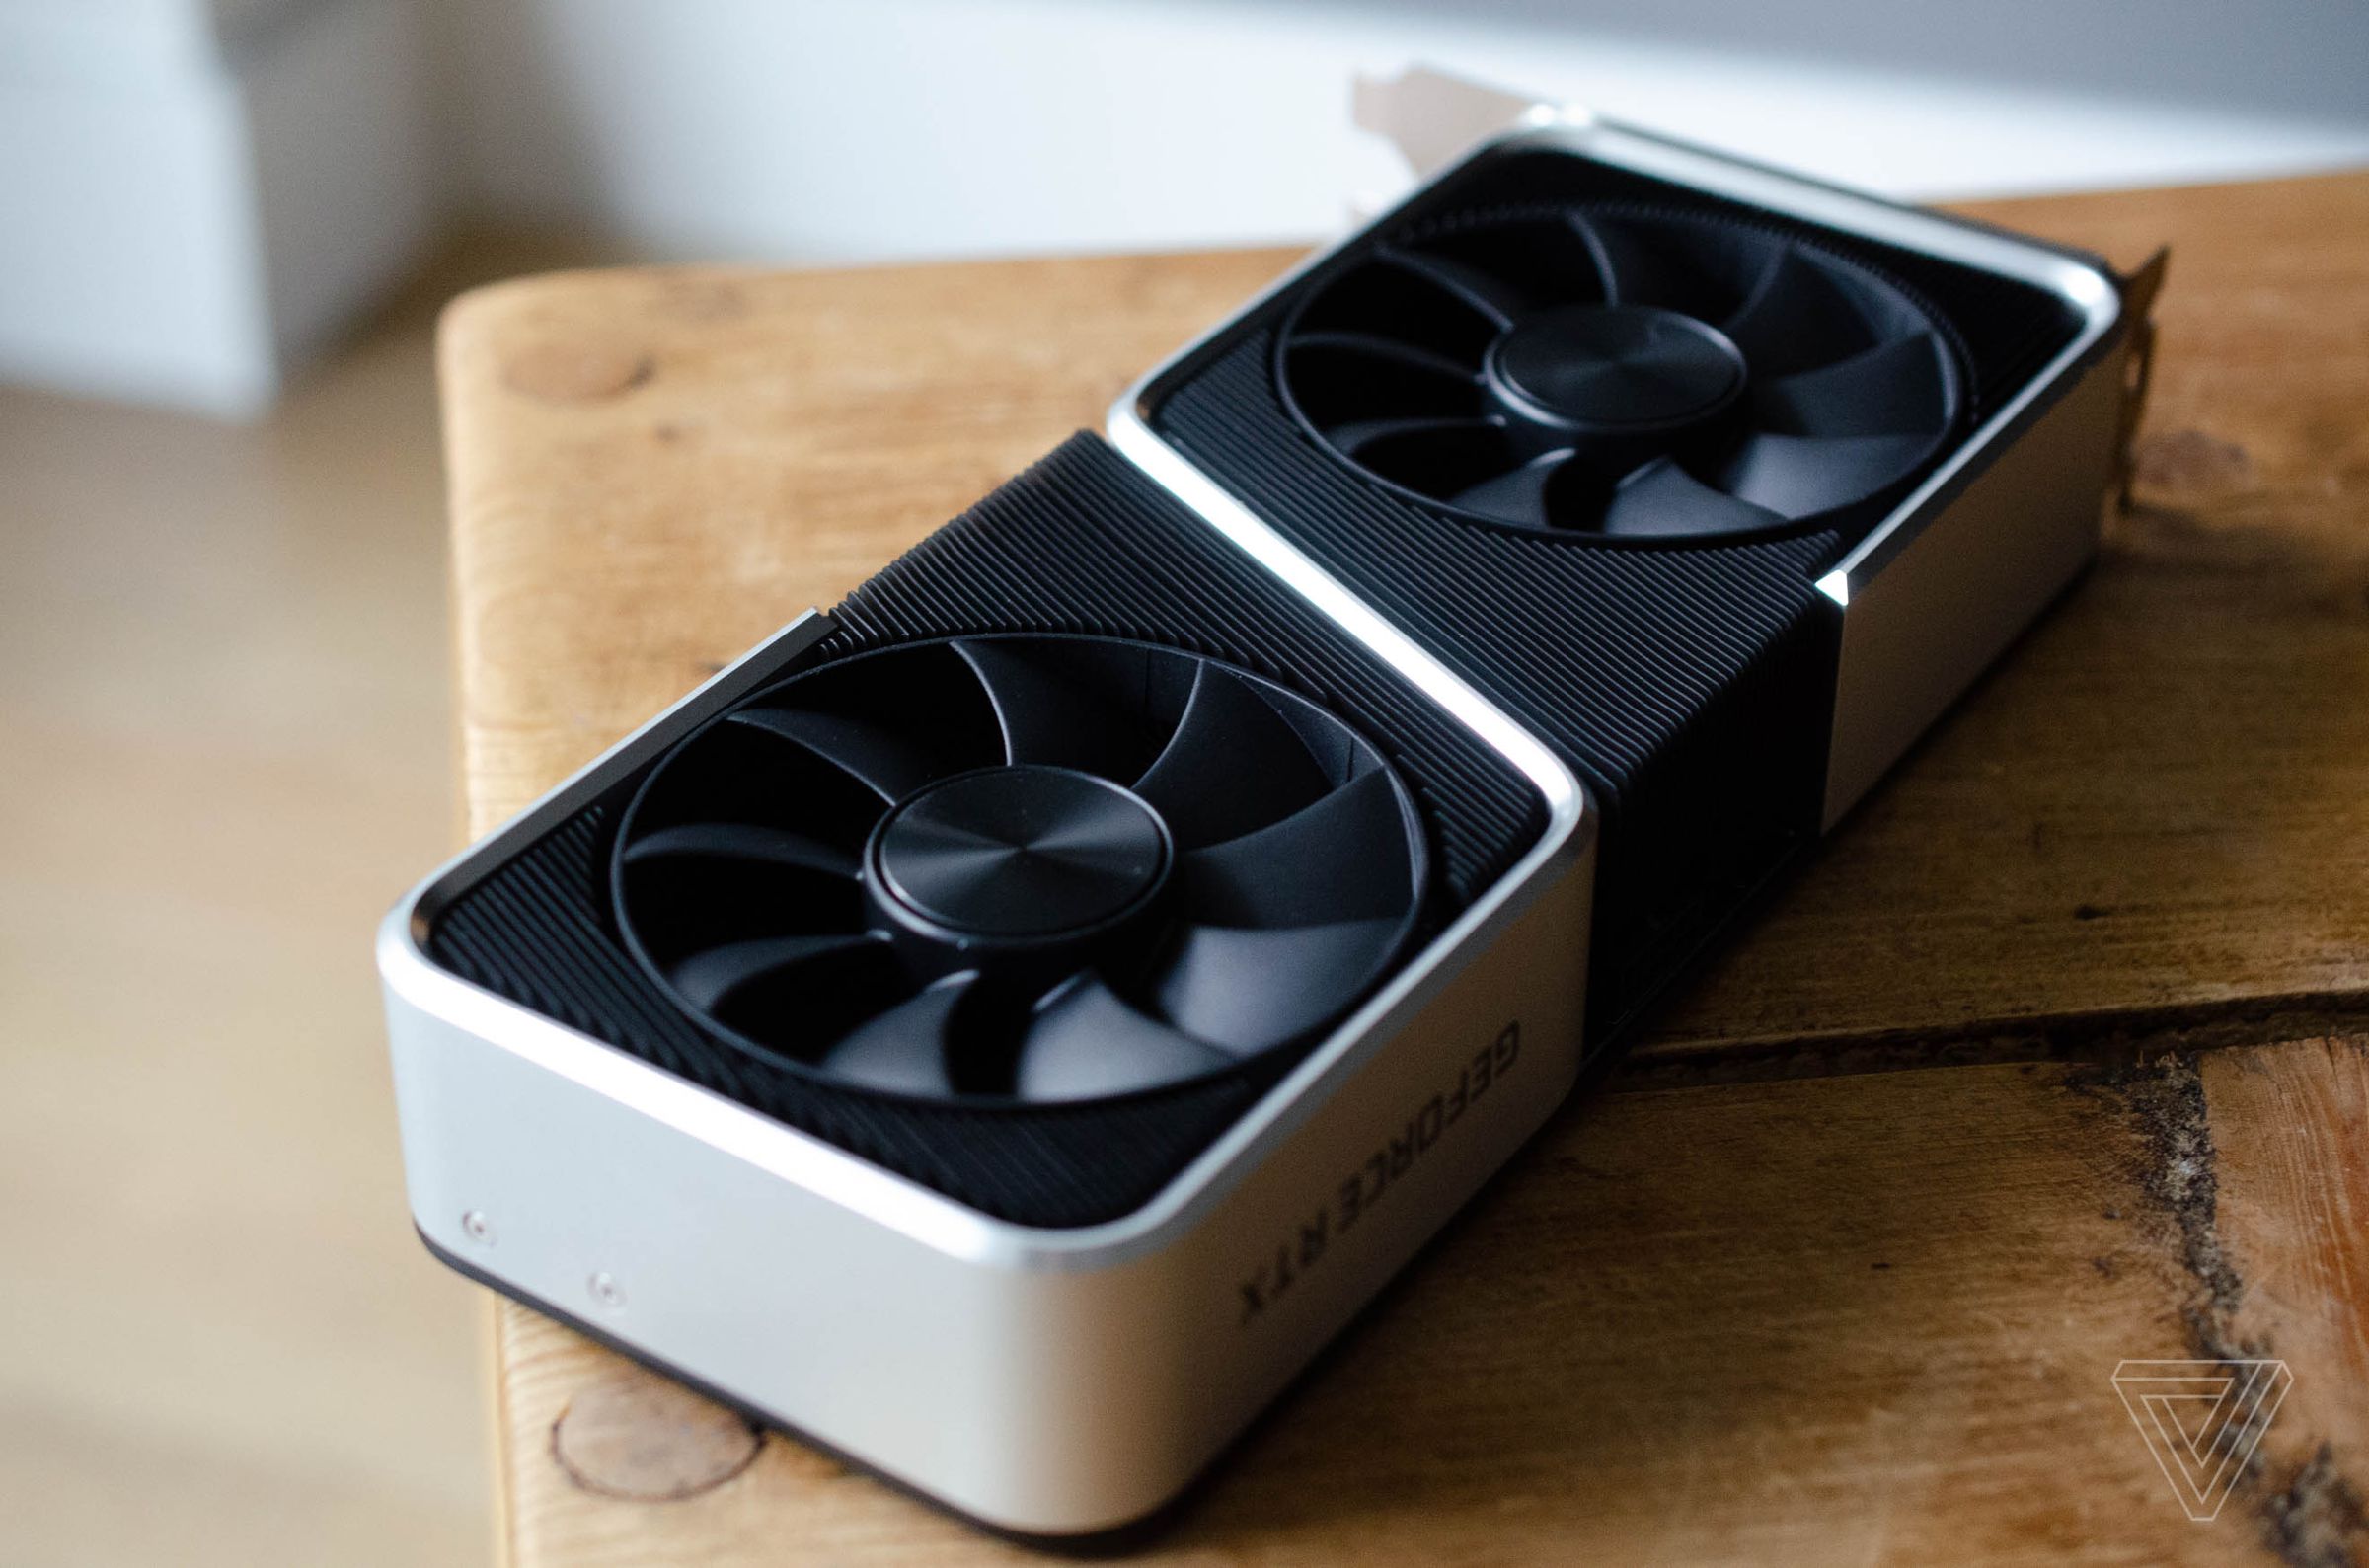 The dual fans on the RTX 3060 Ti.